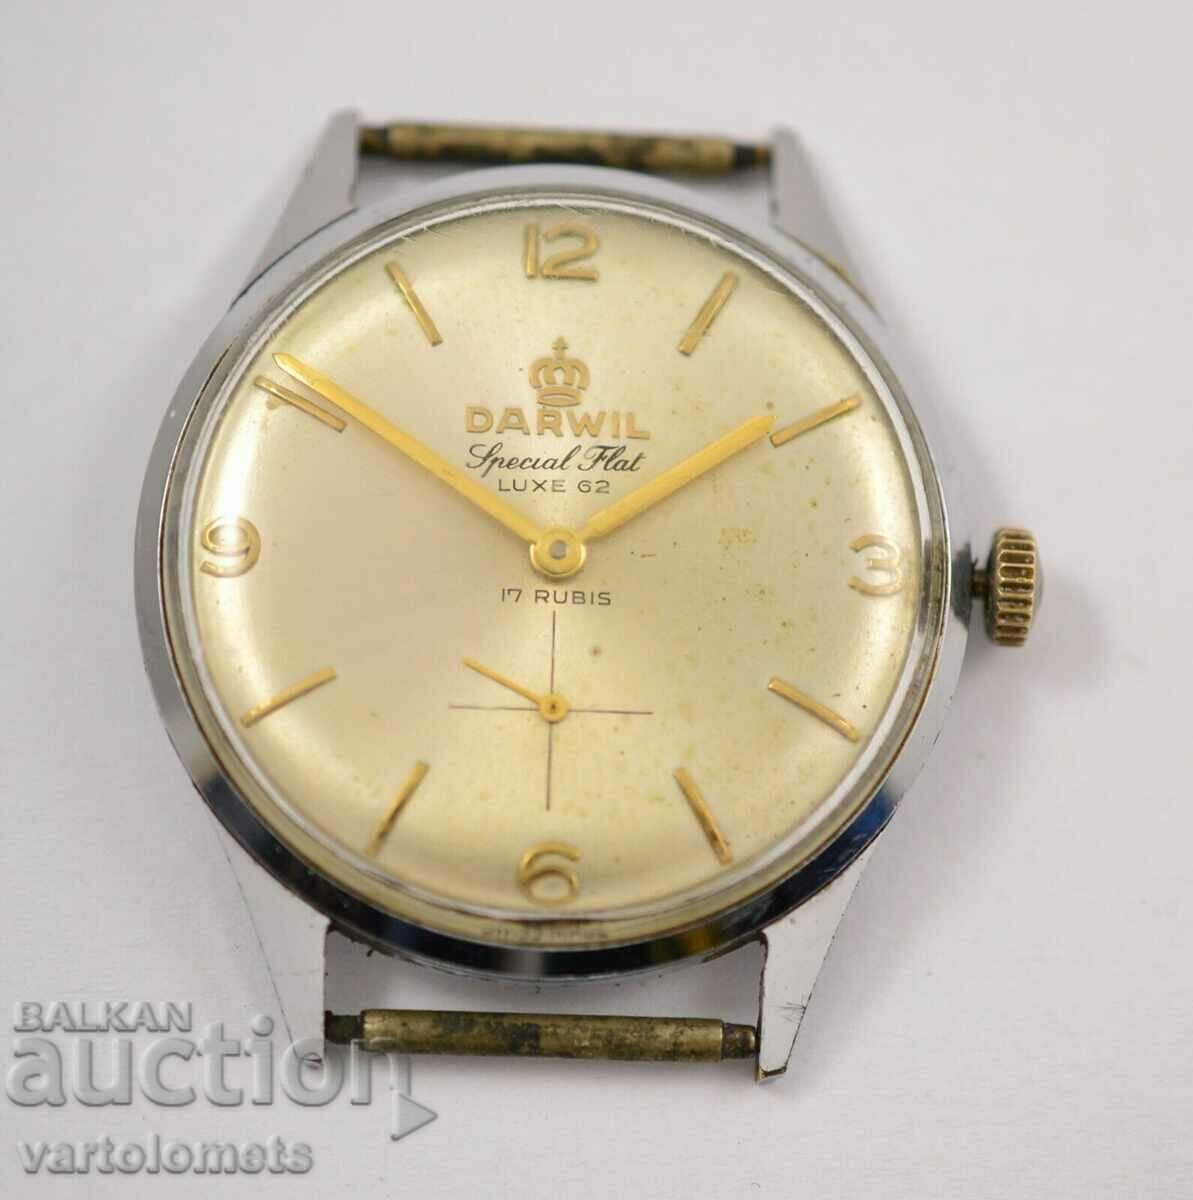 DARWIL Special Flat LUXE 62 SWISS MADE - functioneaza